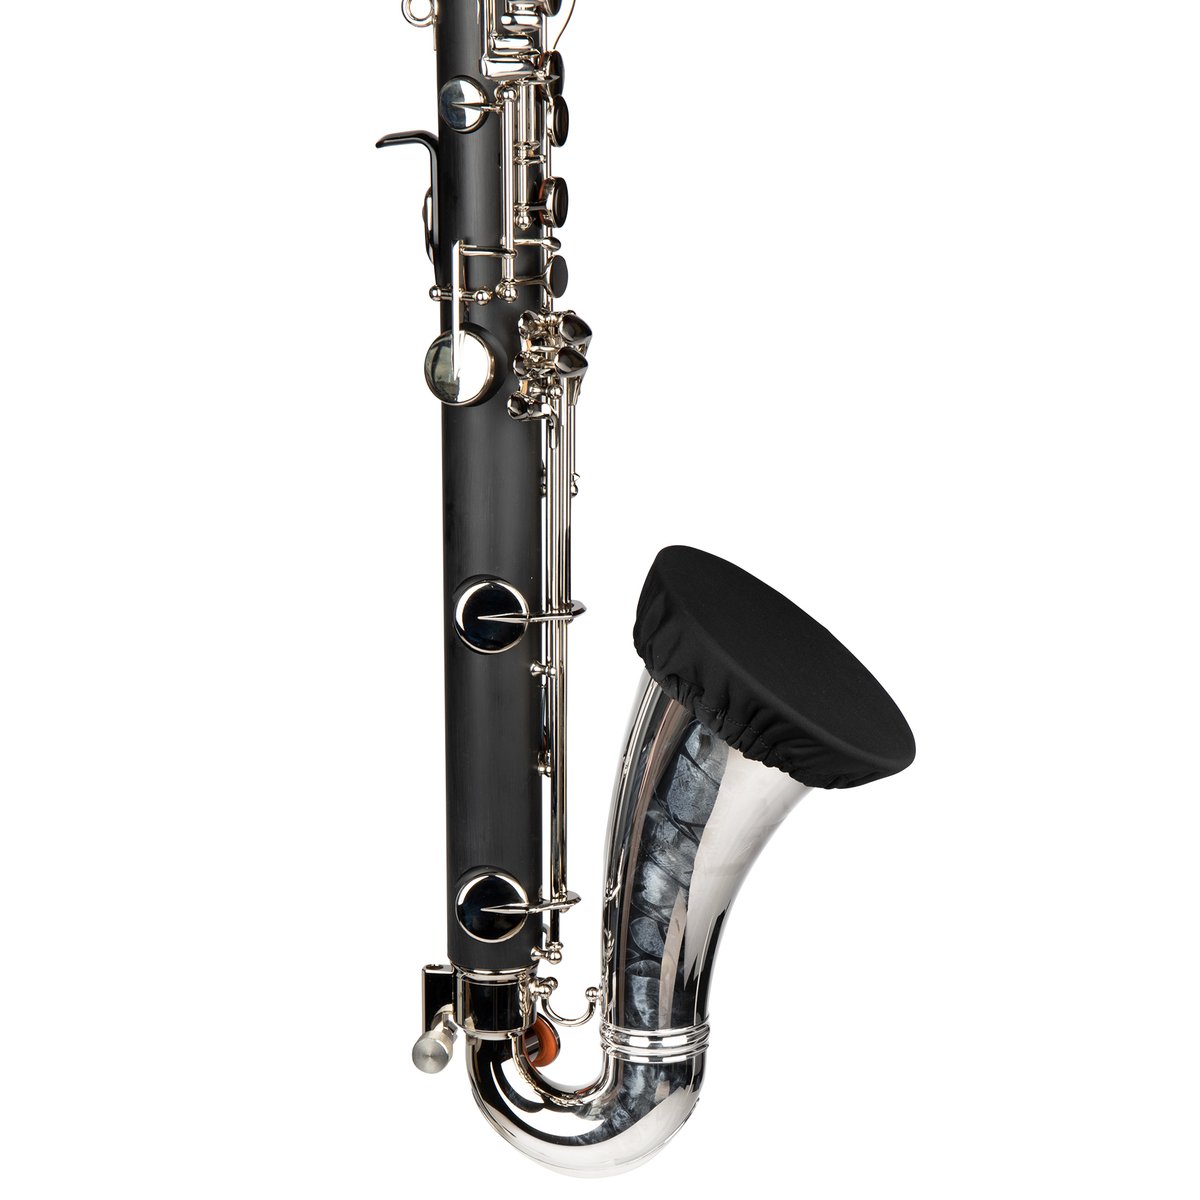 Double-Layer Wind Instrument Cover for Bell Sizes Ranging from 3.75 to 5-Inches (Black Color)